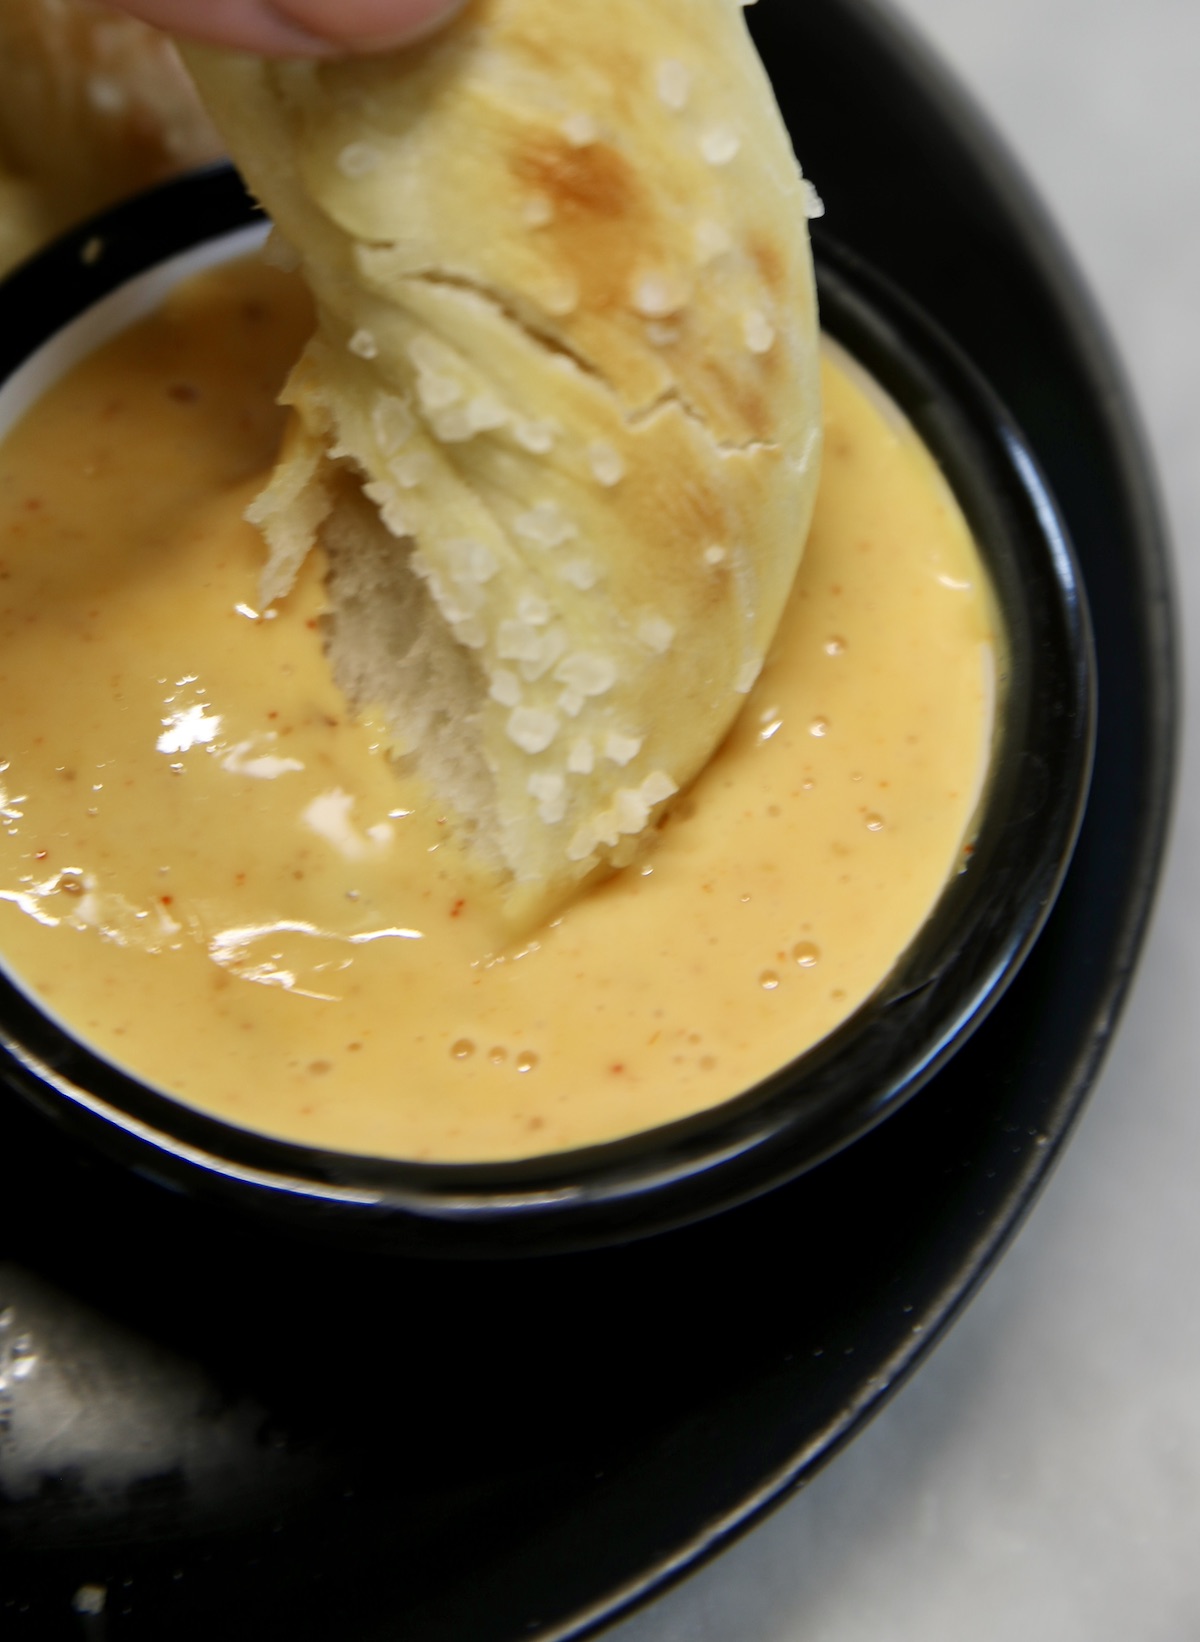 Dipping soft pretzel into cheese sauce.